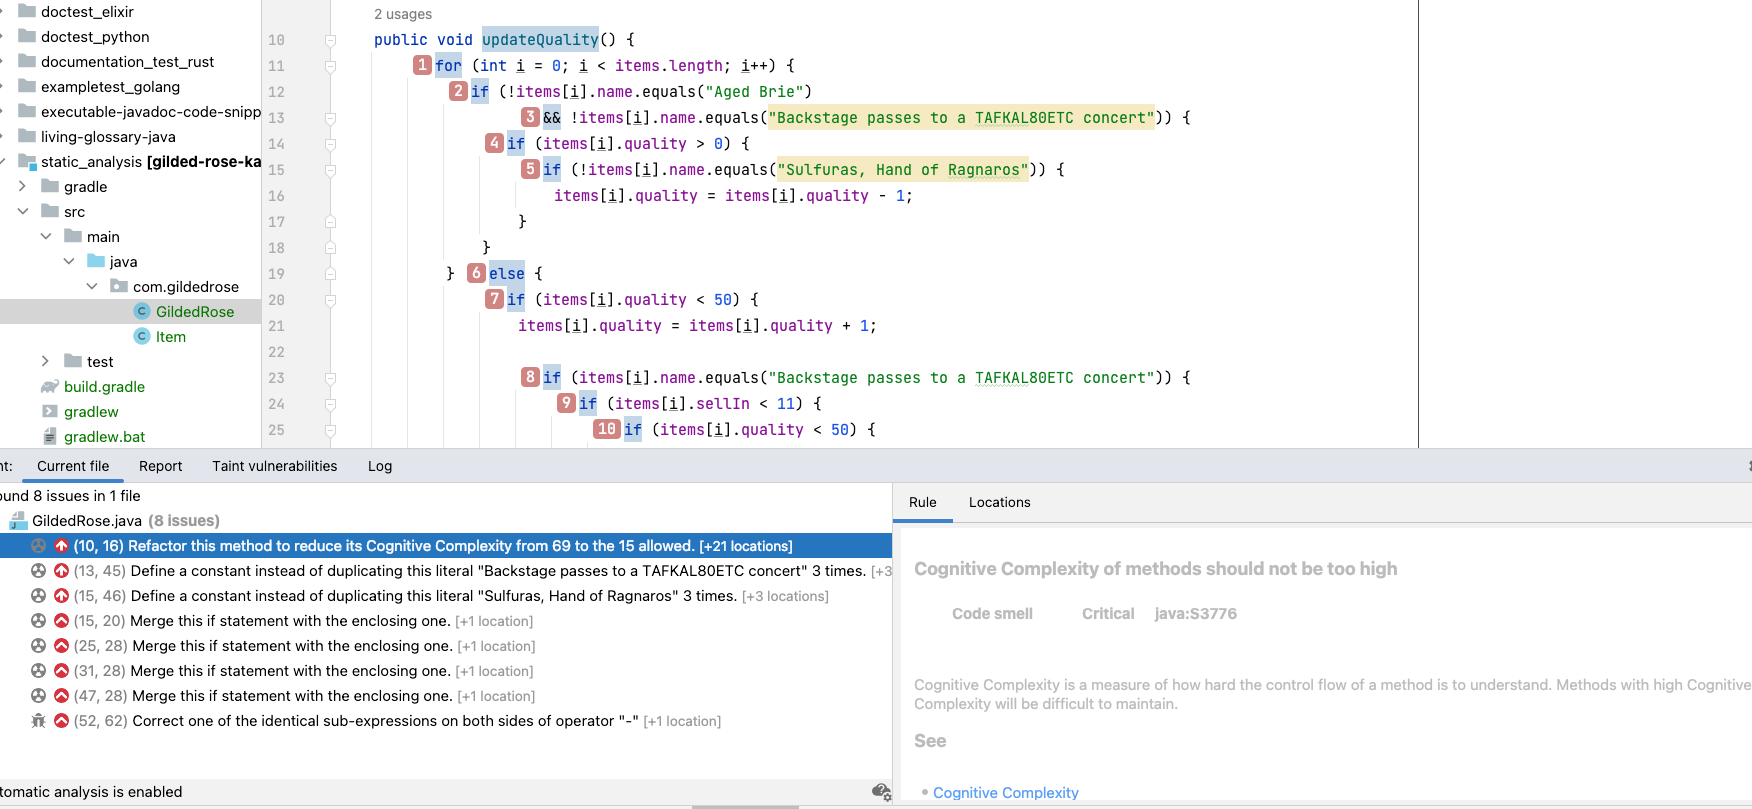 Screen capture of Sonarlint plugin in IDE IntelliJ Idea showing code issues both in sonarlint report panel and embedded in code